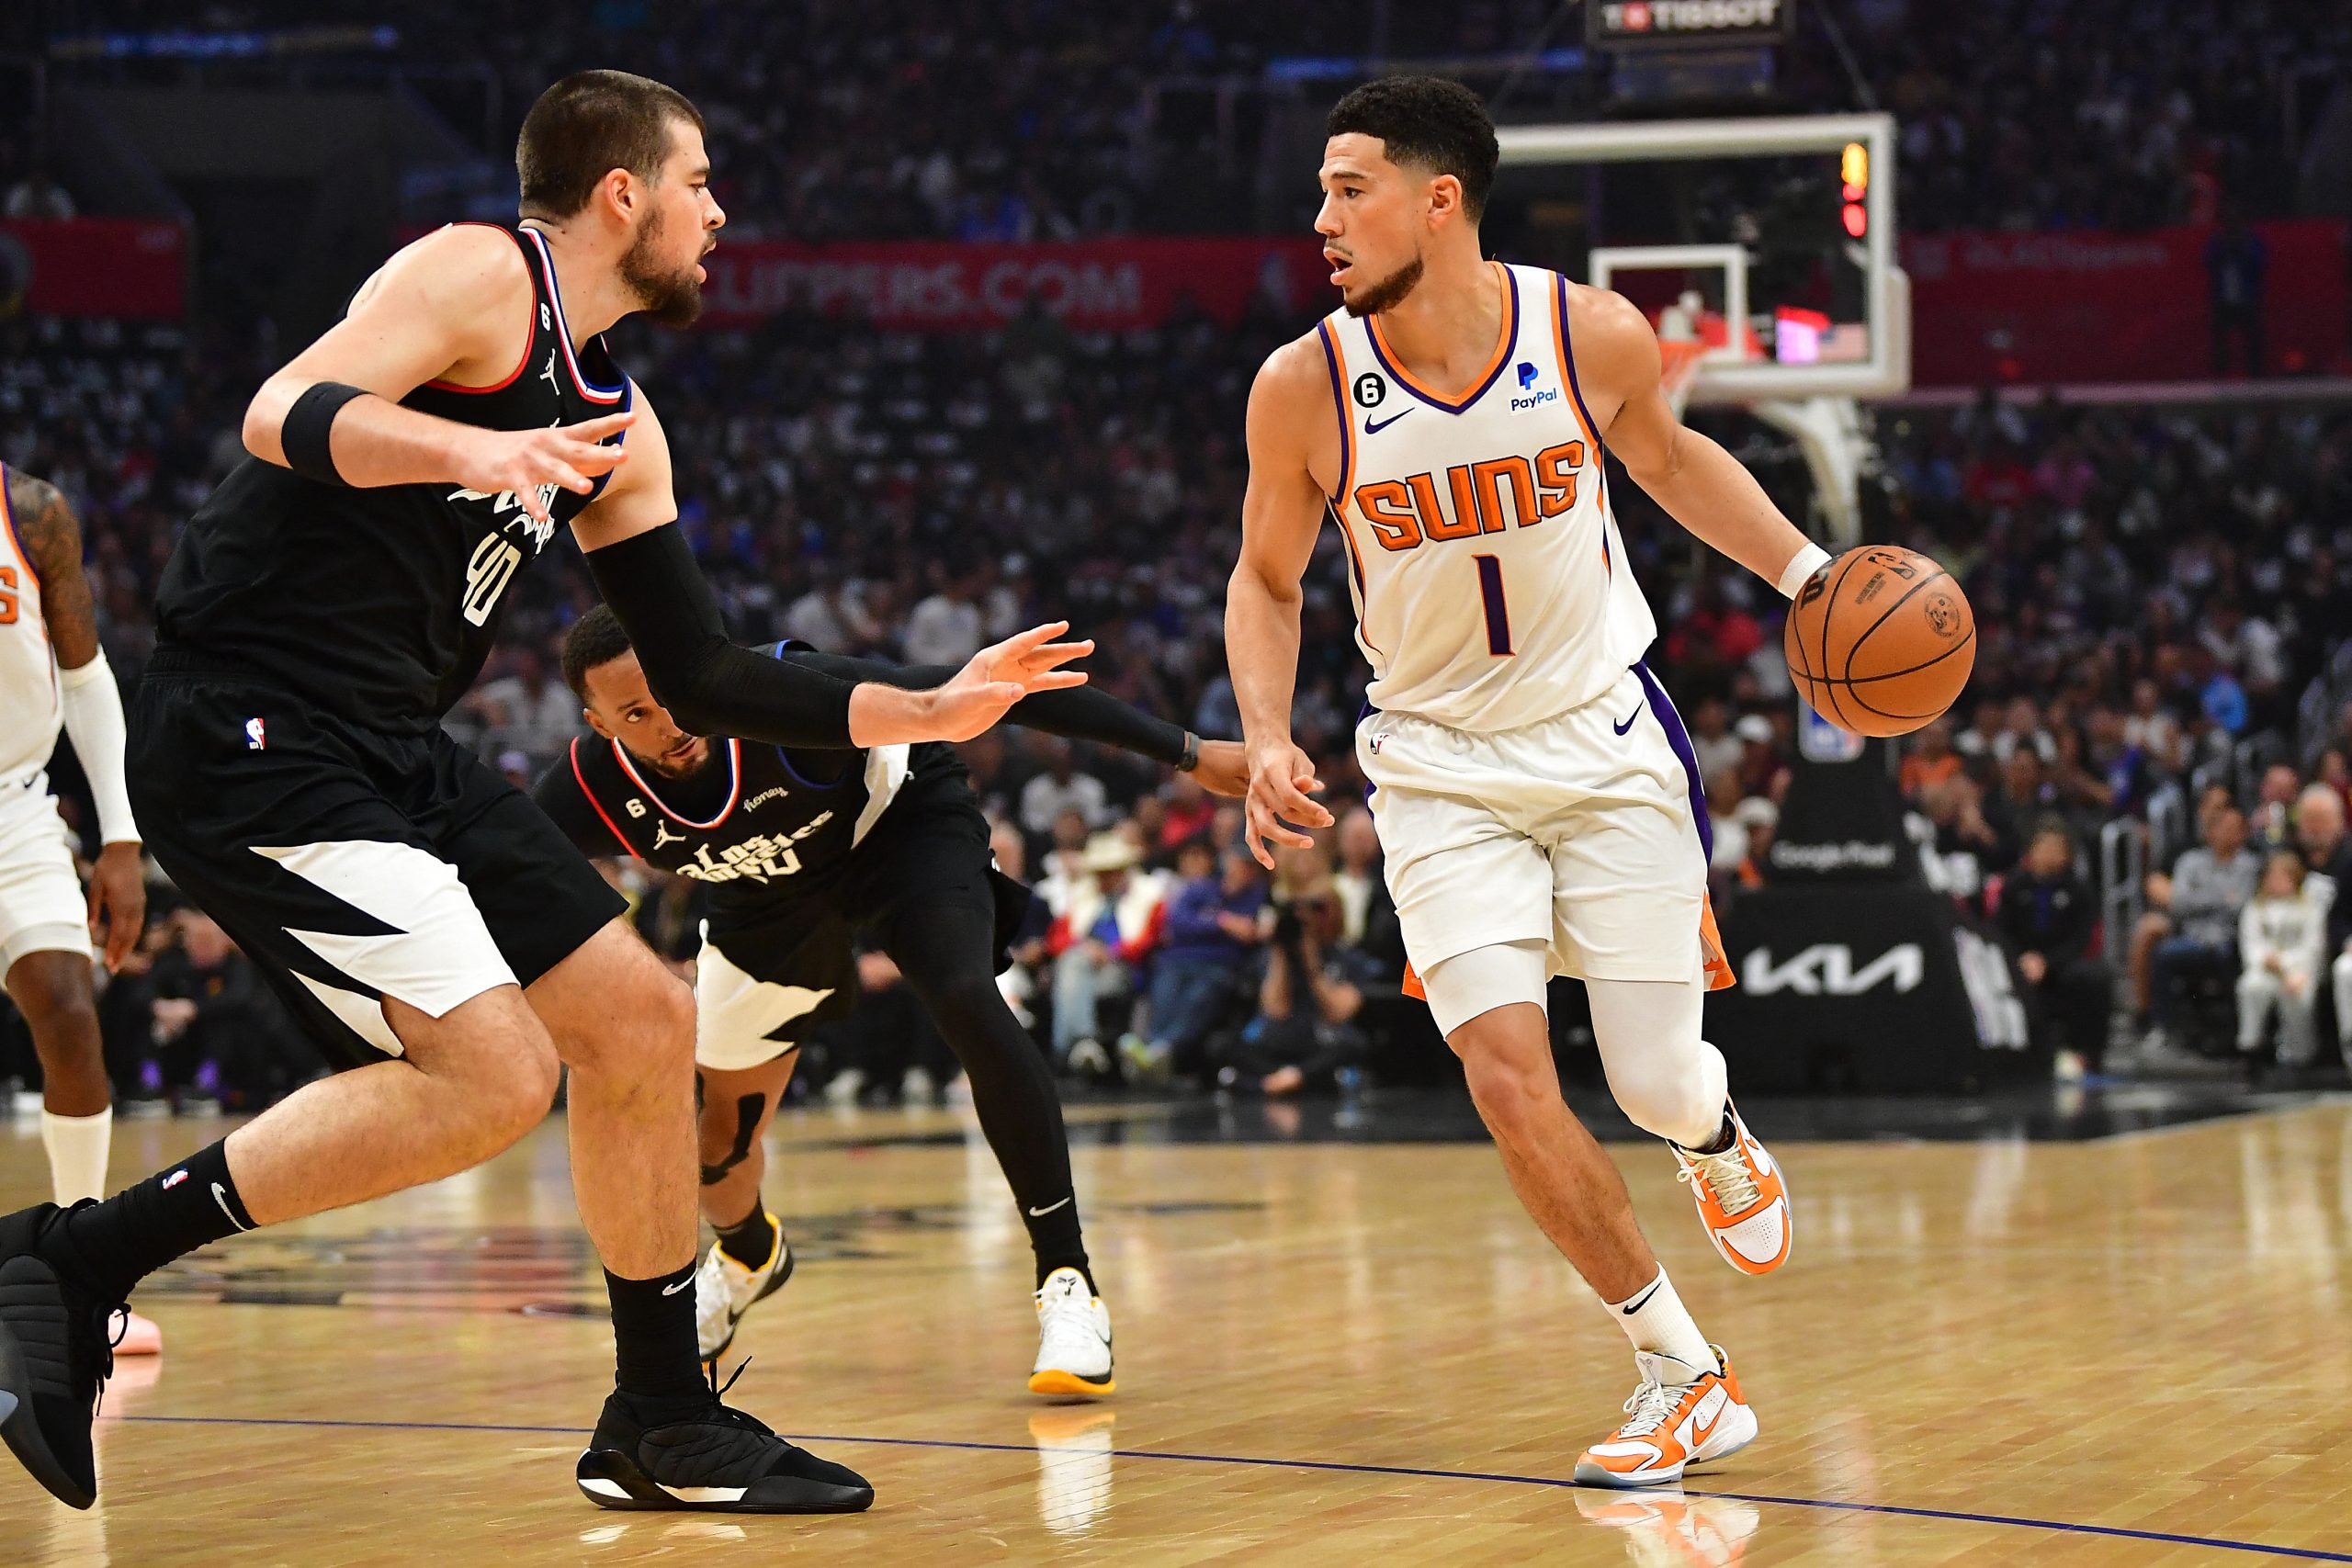 Apr 22, 2023; Los Angeles, California, USA; Phoenix Suns guard Devin Booker (1) moves the ball against Los Angeles Clippers center Ivica Zubac (40) during the first half in game four of the 2023 NBA playoffs at Crypto.com Arena. Mandatory Credit: Gary A. Vasquez-USA TODAY Sports Photo: Gary A. Vasquez/REUTERS